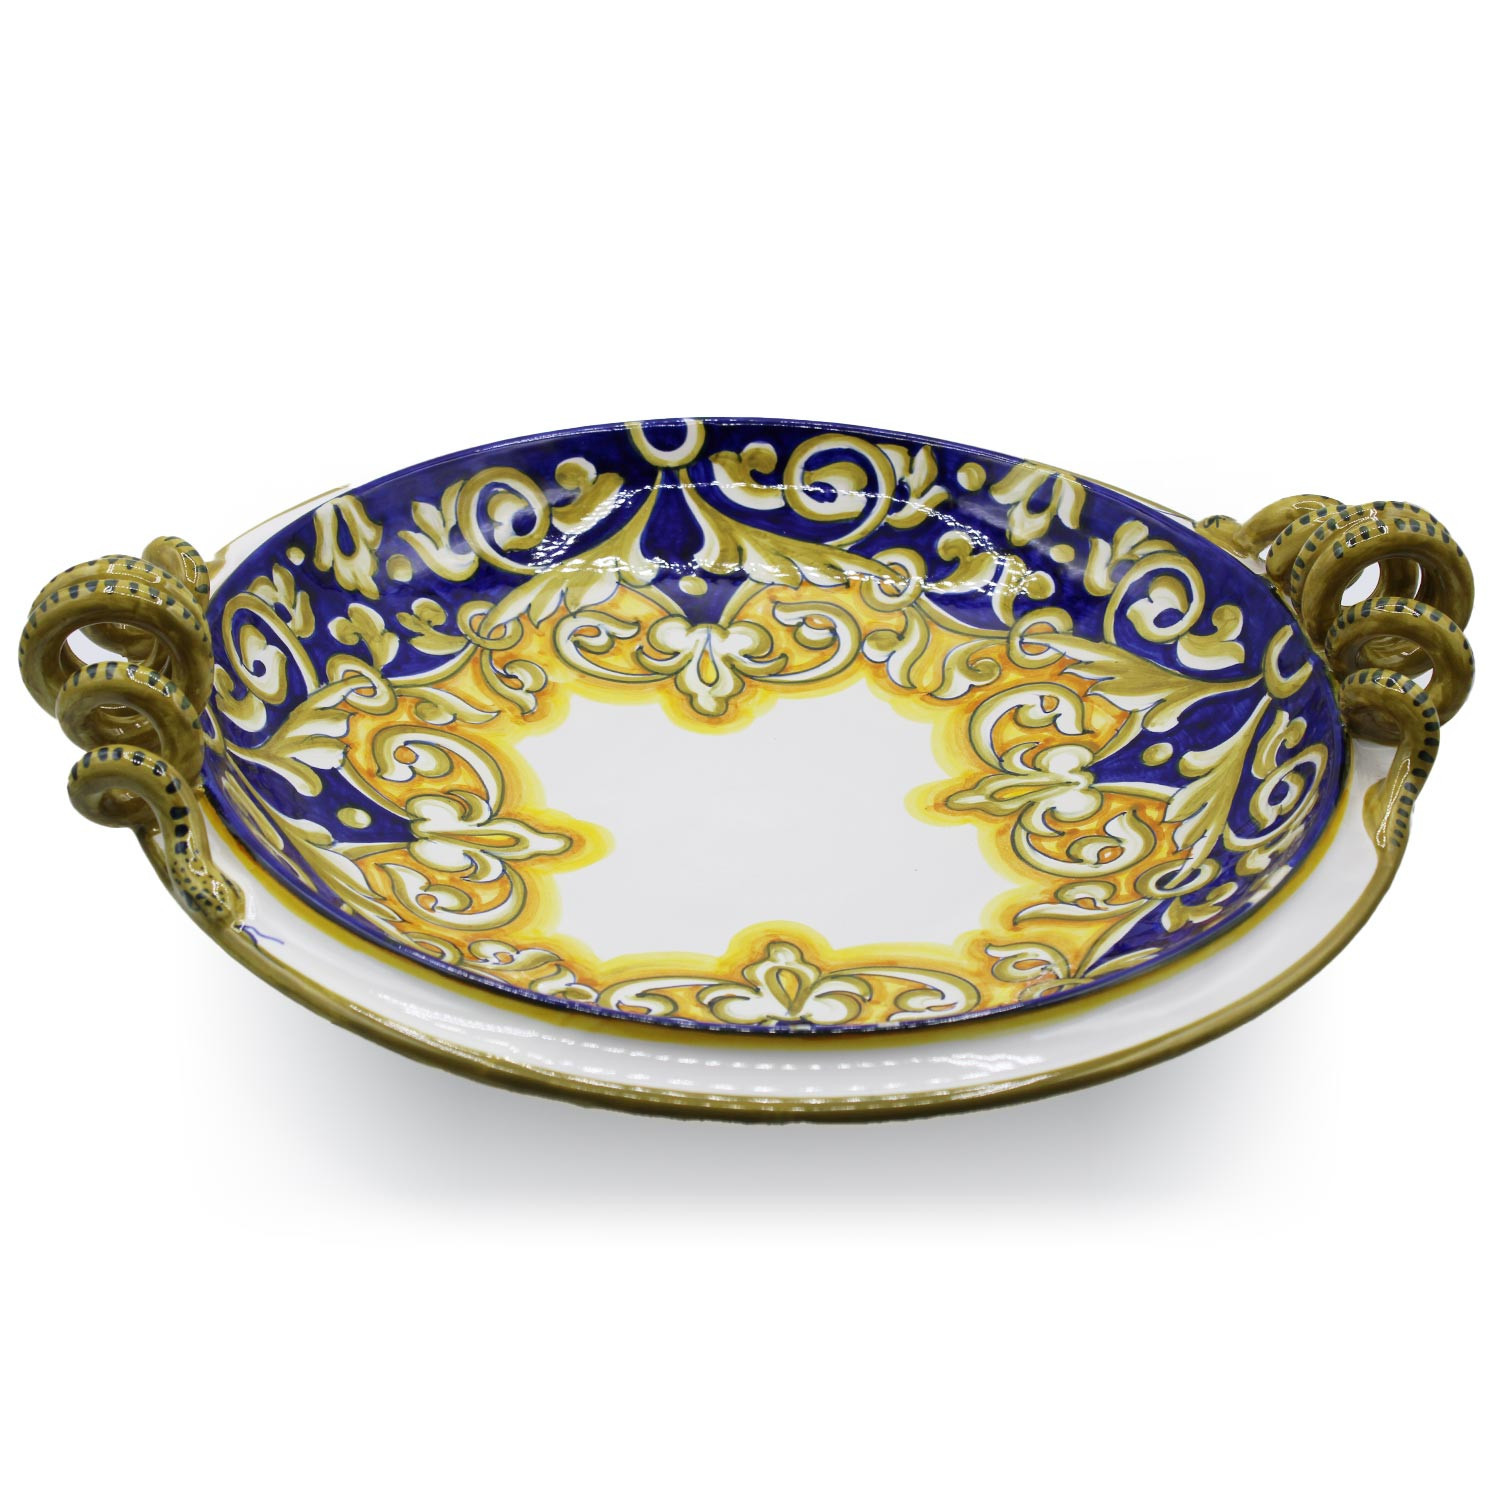 Frut bowl with snake-shaped handles